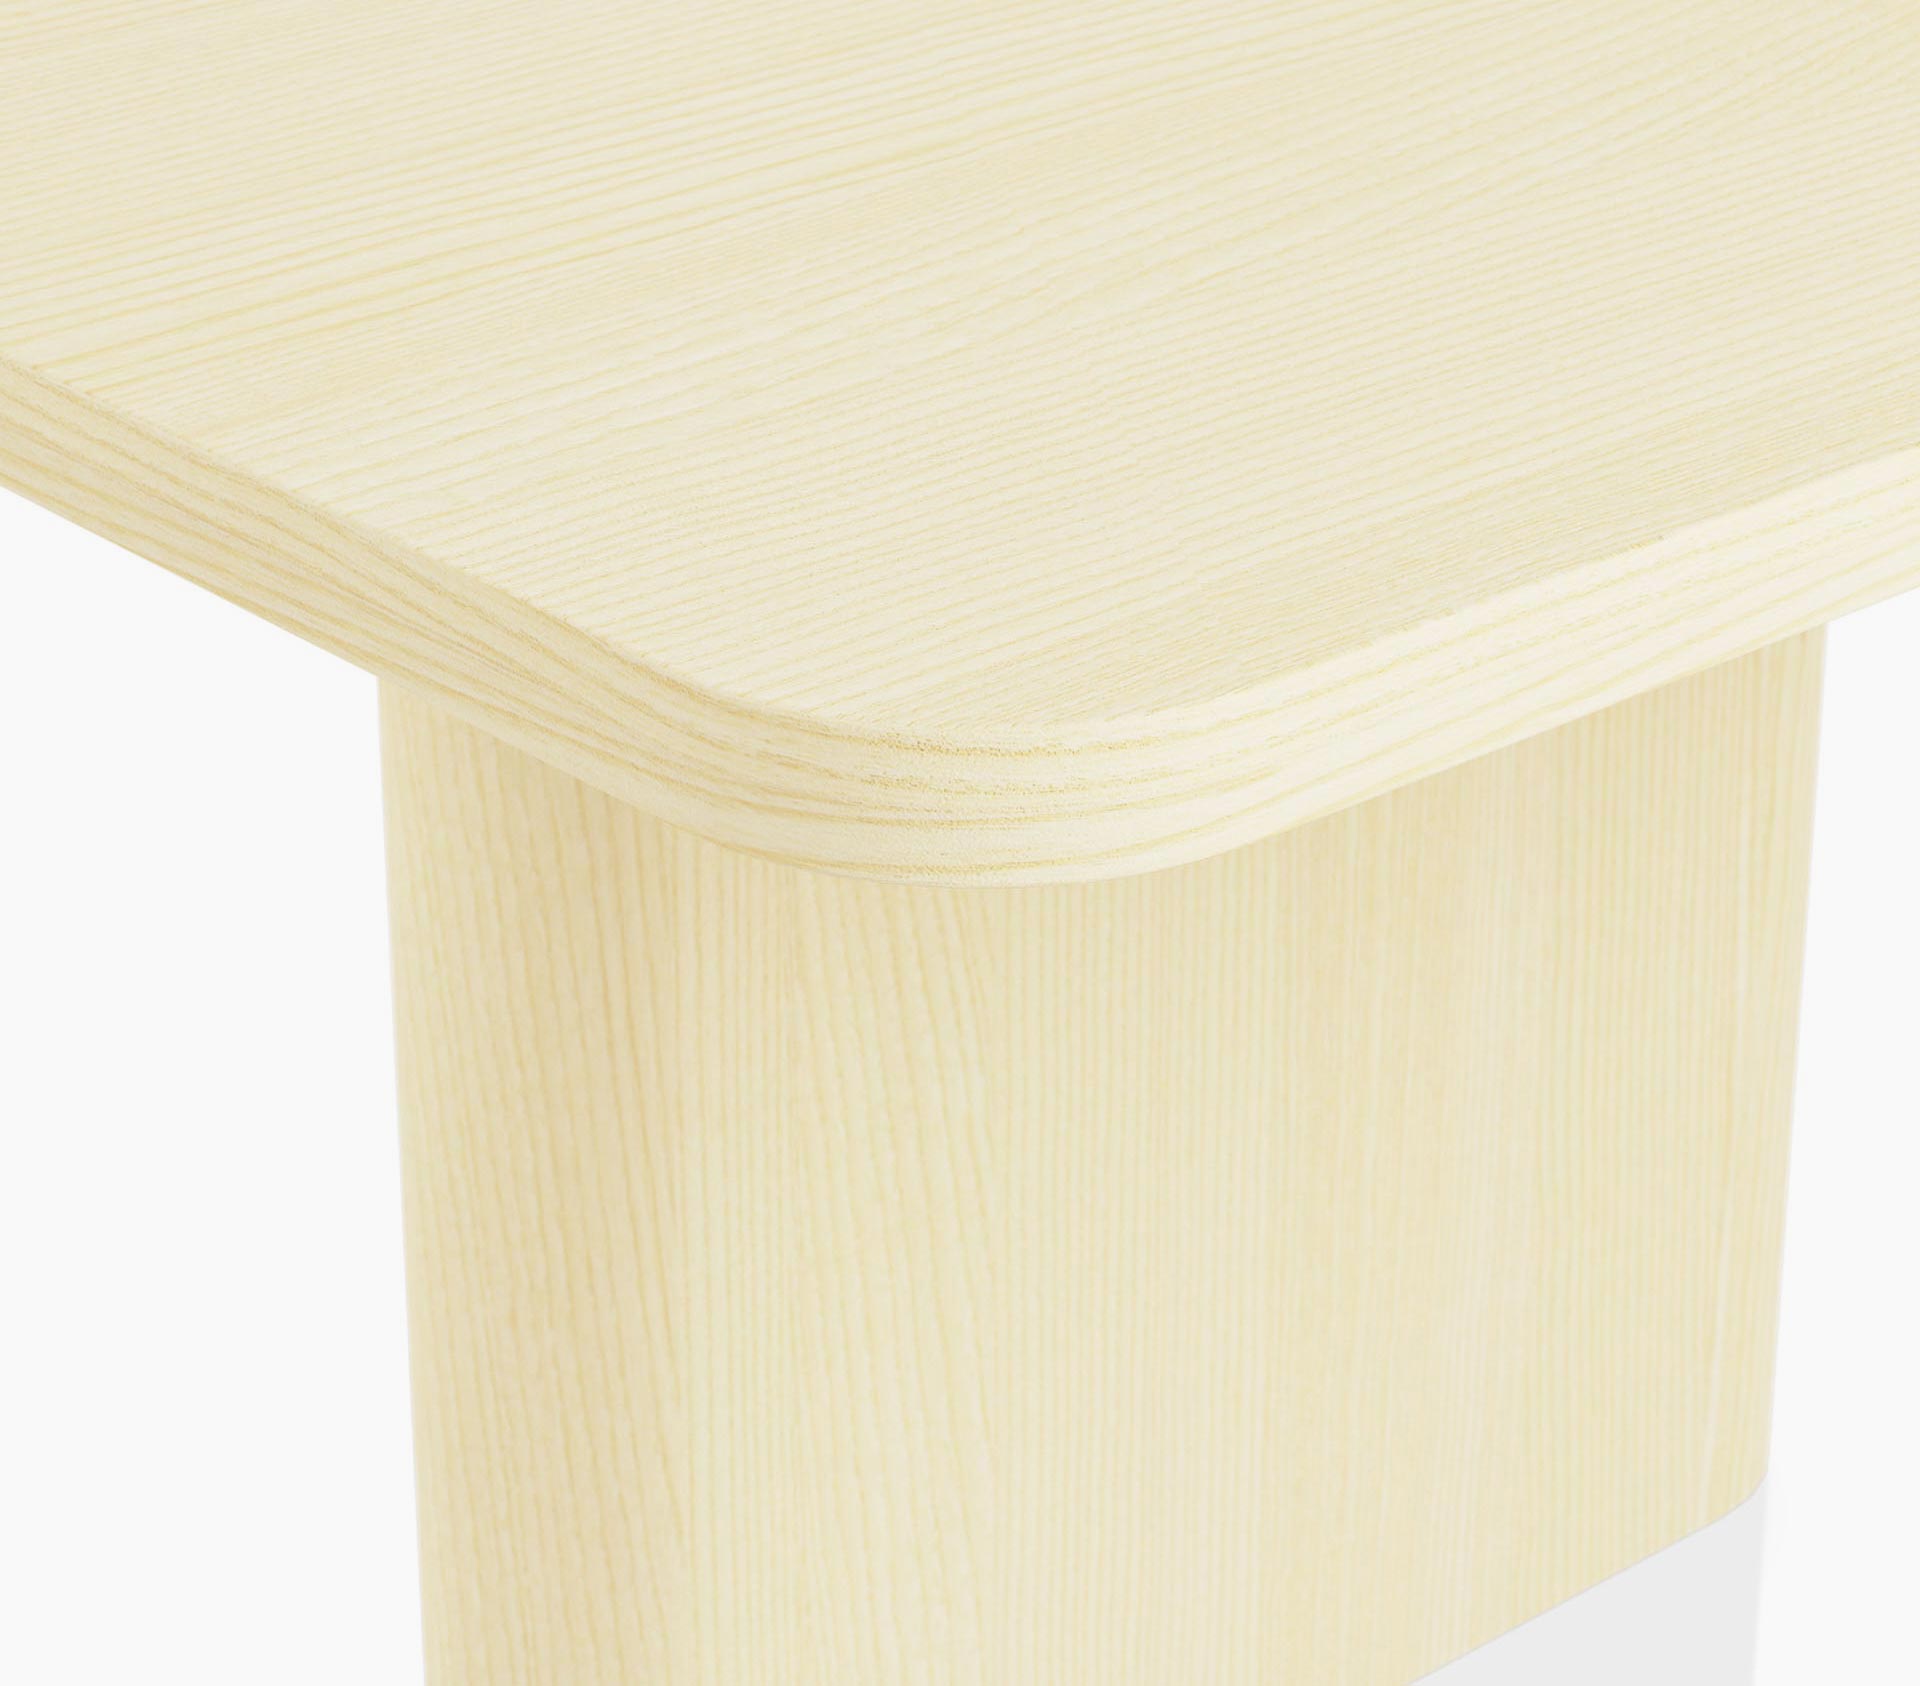 Edge detail on a rectangular JD Conference Table in white quarter cut ash with a 1.25” thick tabletop and a racetrack-shaped base